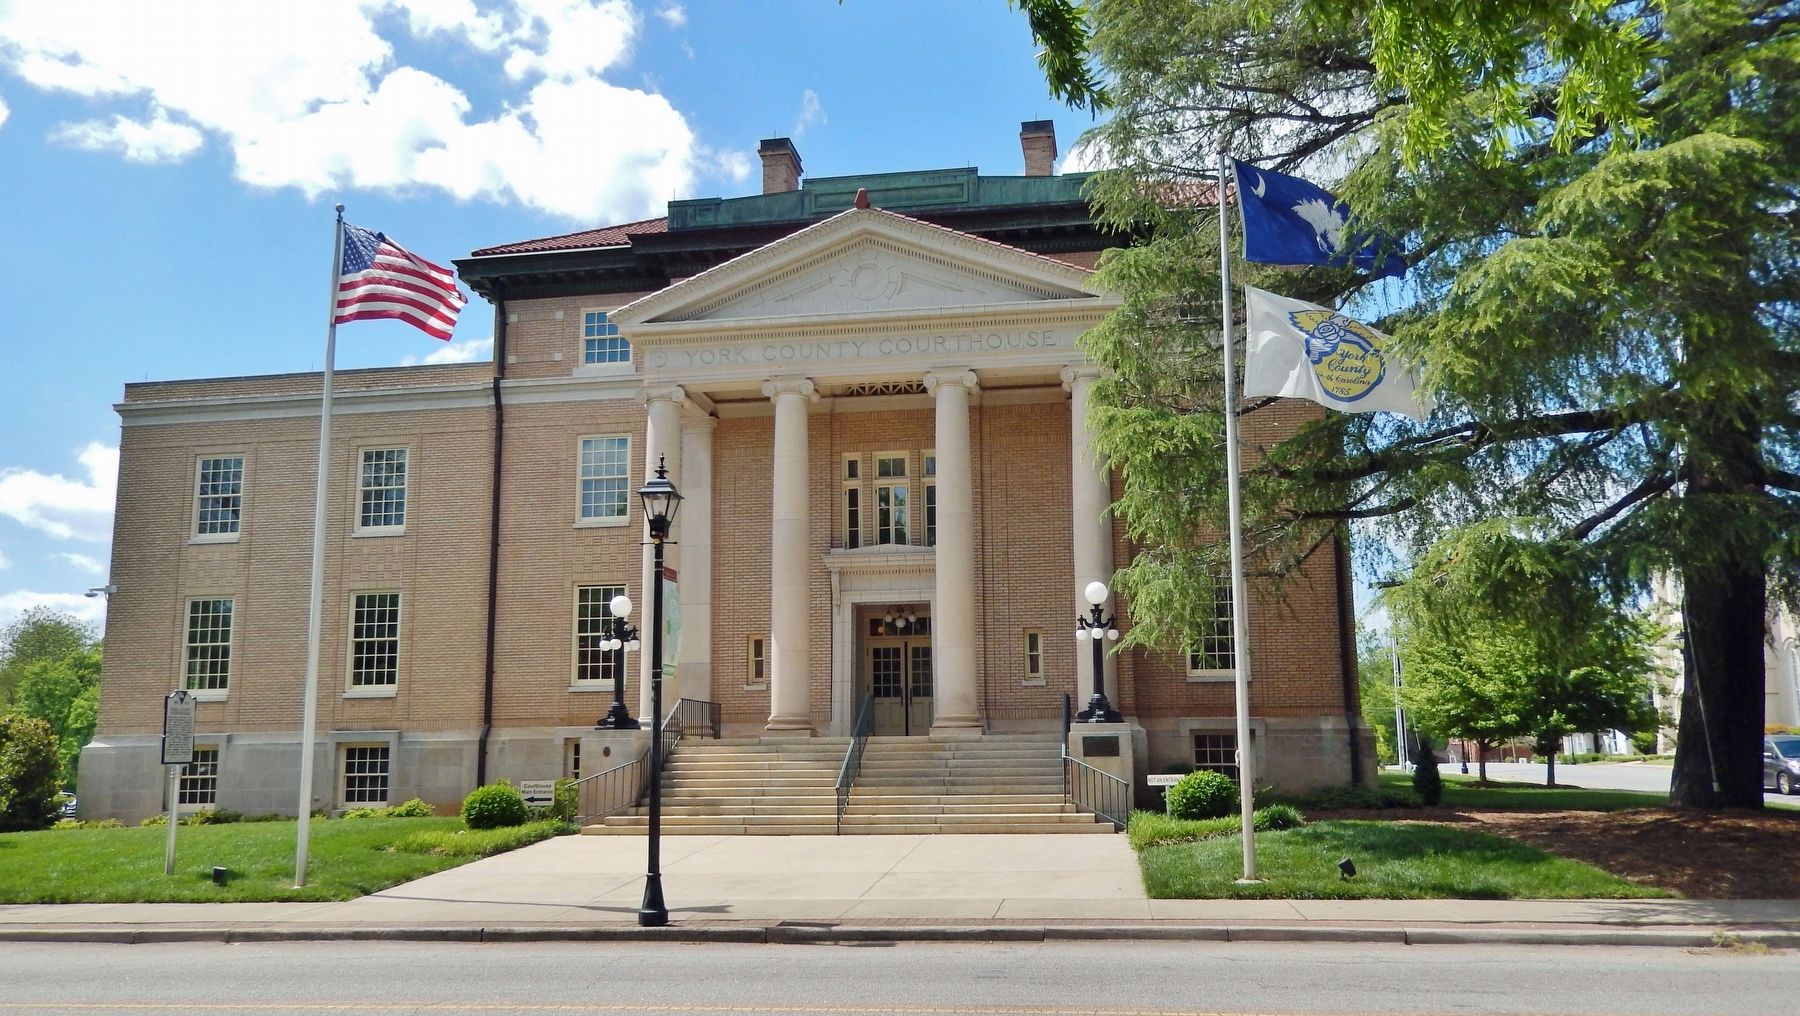 York County Courthouse (<i>east/front elevation</i>) image. Click for full size.